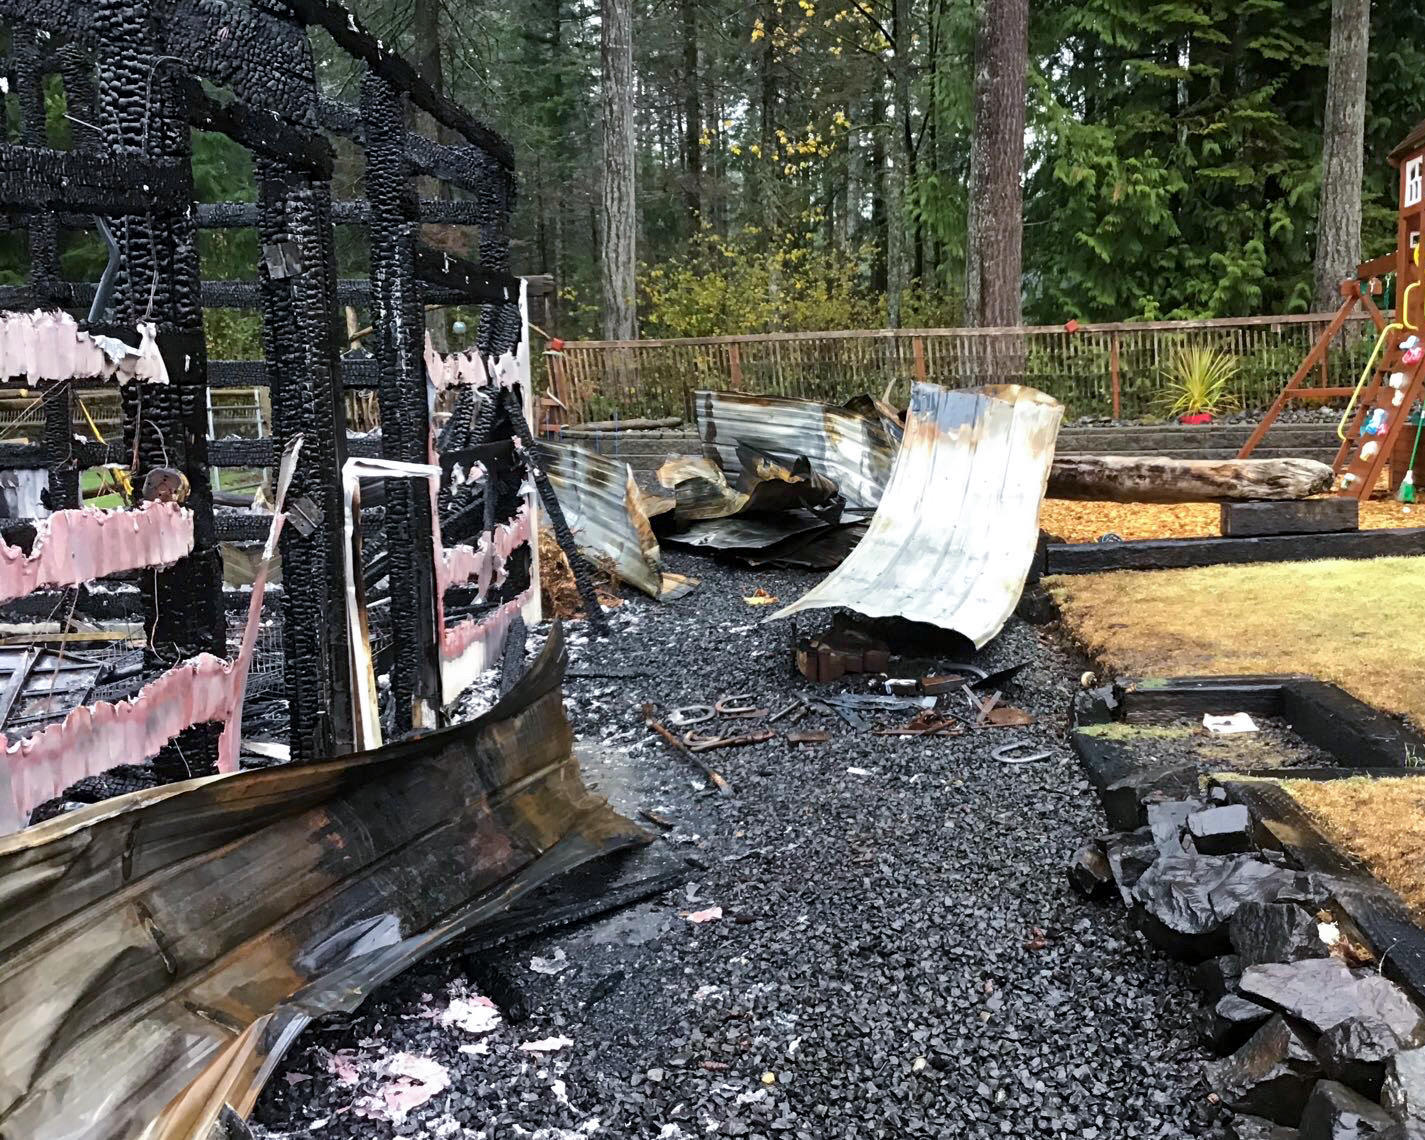 SERVPRO of Auburn/Enumclaw understands the devastation and stress that goes hand in hand with a fire loss.